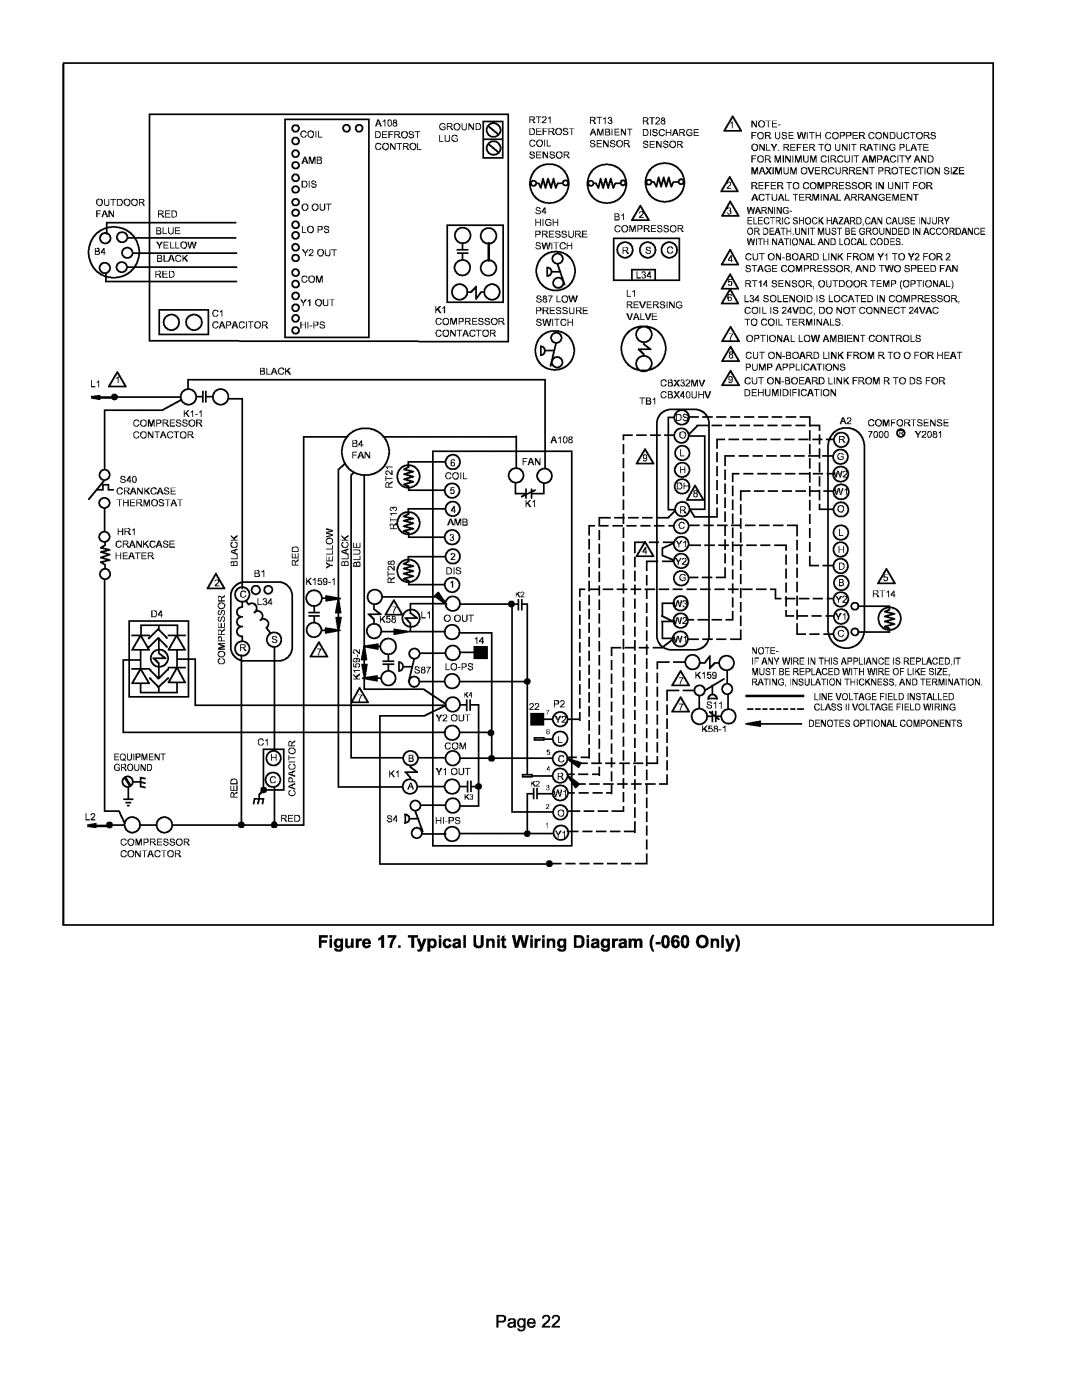 Lenox P506640-01, Elite Series XP16 Units Heat Pumps installation instructions Typical Unit Wiring Diagram −060 Only, Page 